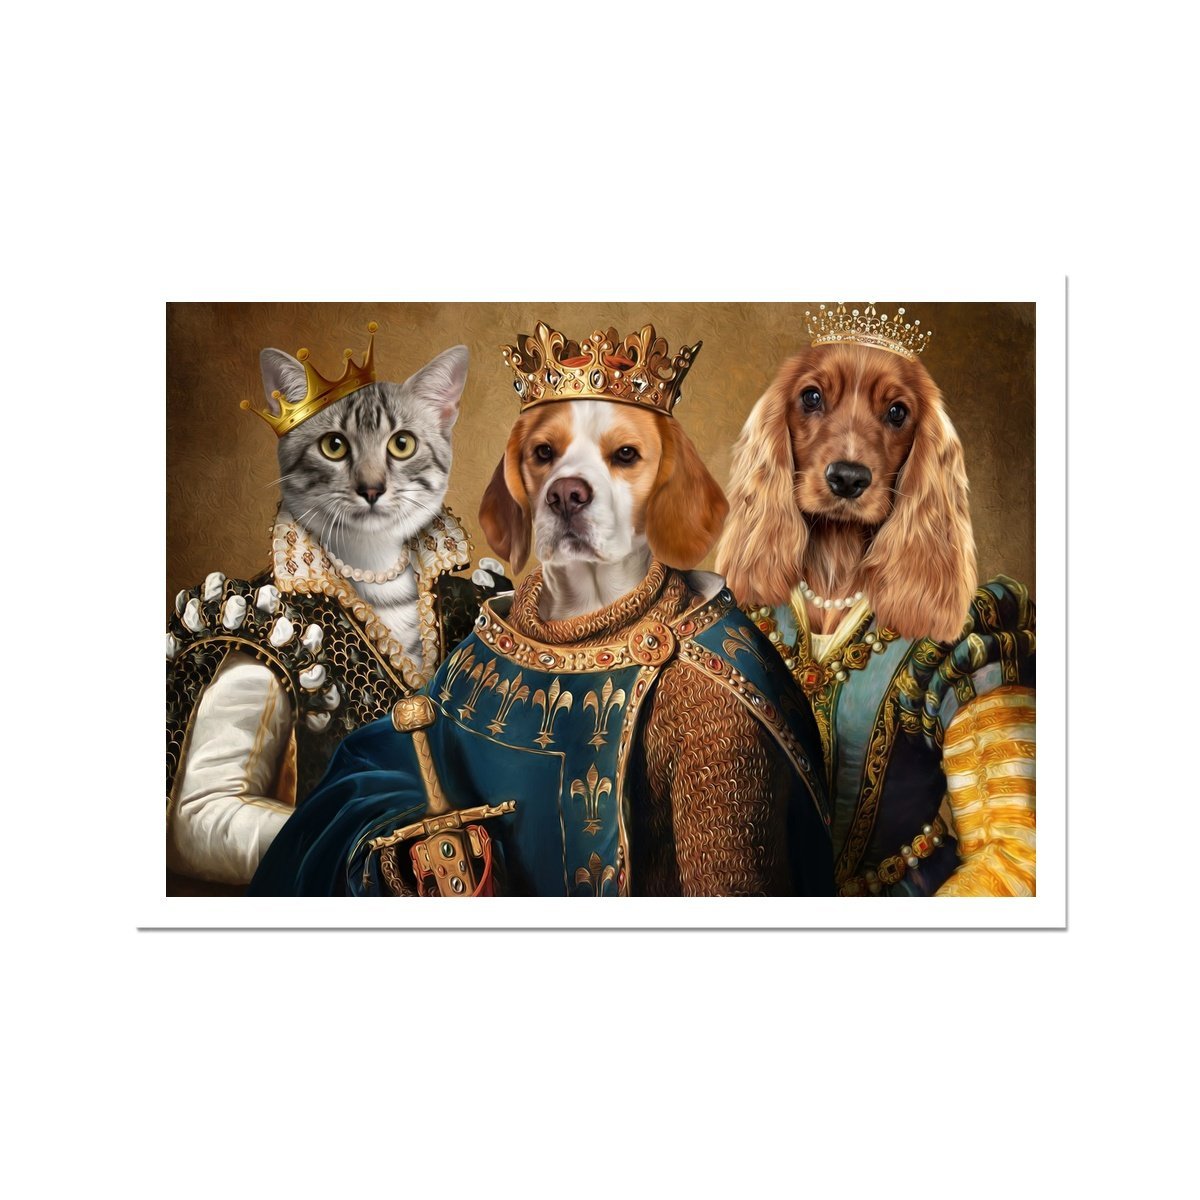 The Royals: Custom 3 Pet Poster - Paw & Glory - #pet portraits# - #dog portraits# - #pet portraits uk#Paw & Glory, pawandglory, pet portraits in oils, cat picture painting, cat picture painting, hogwarts dog houses, best dog artists, digital pet paintings, pet portraits